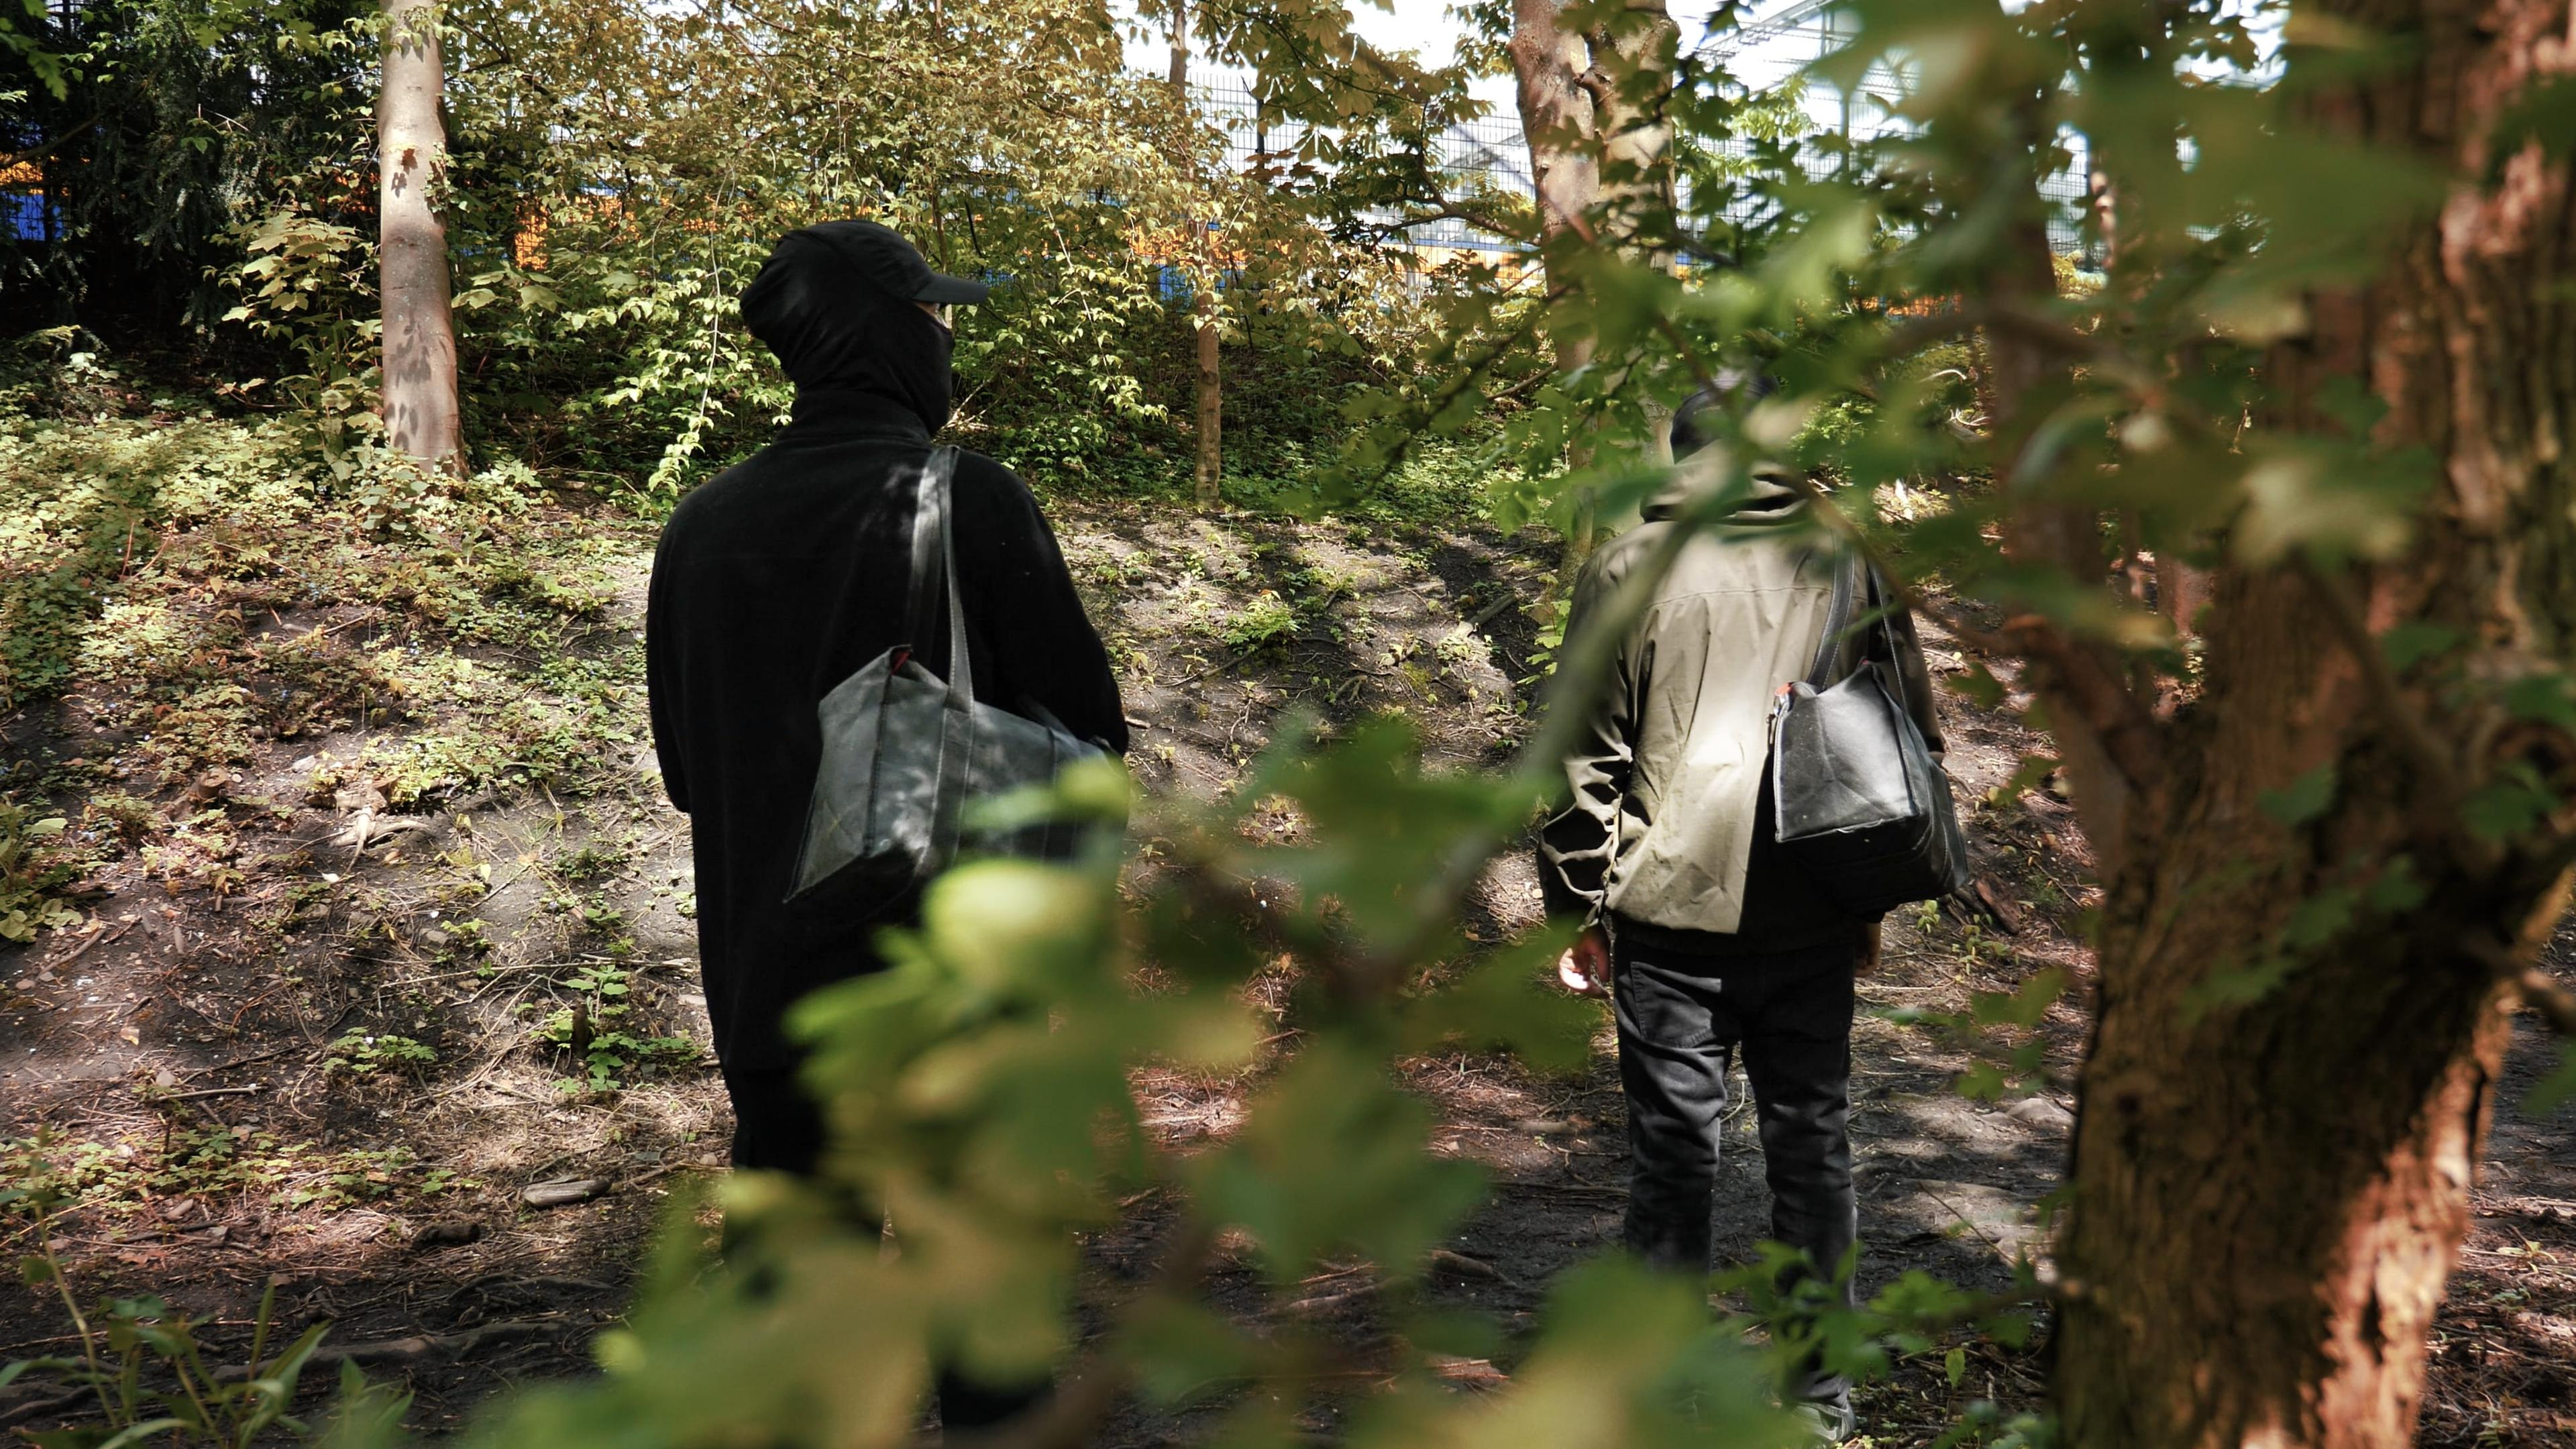 Two people in dark clothes walking through between trees